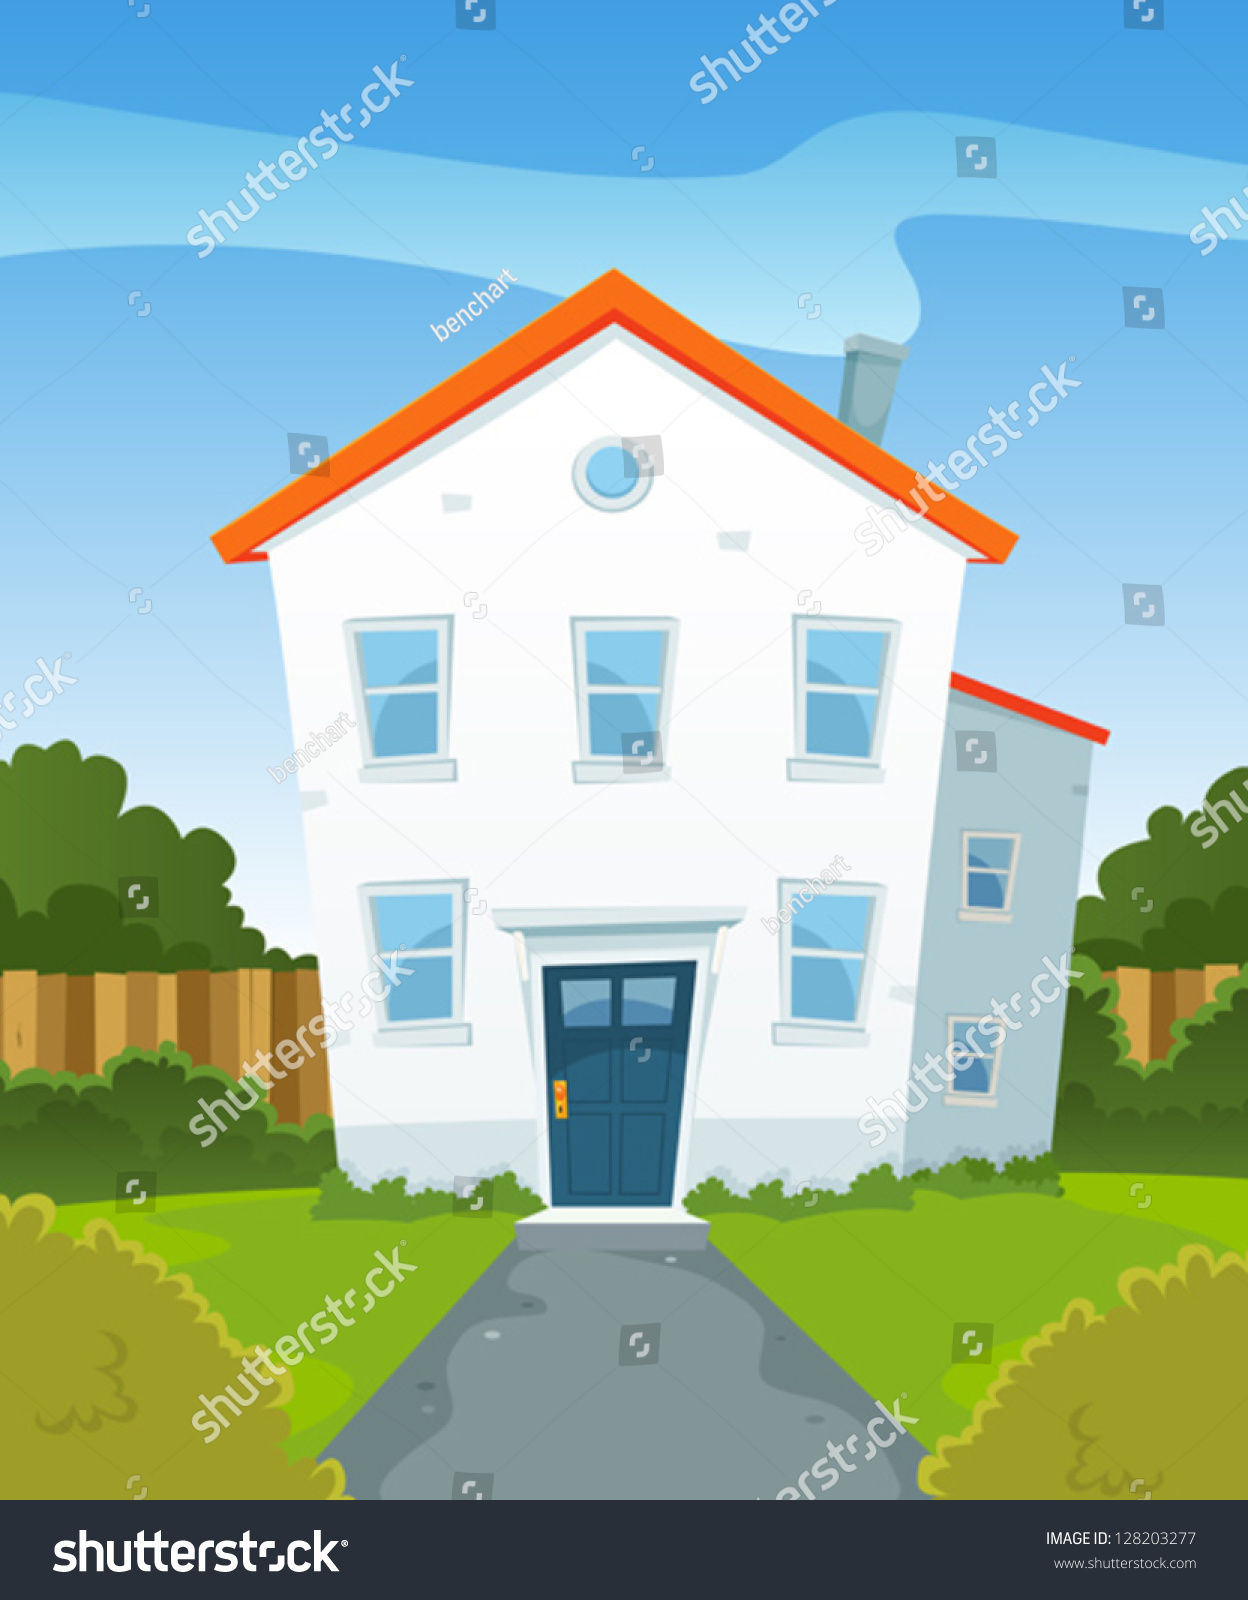 clipart of house with garden - photo #27